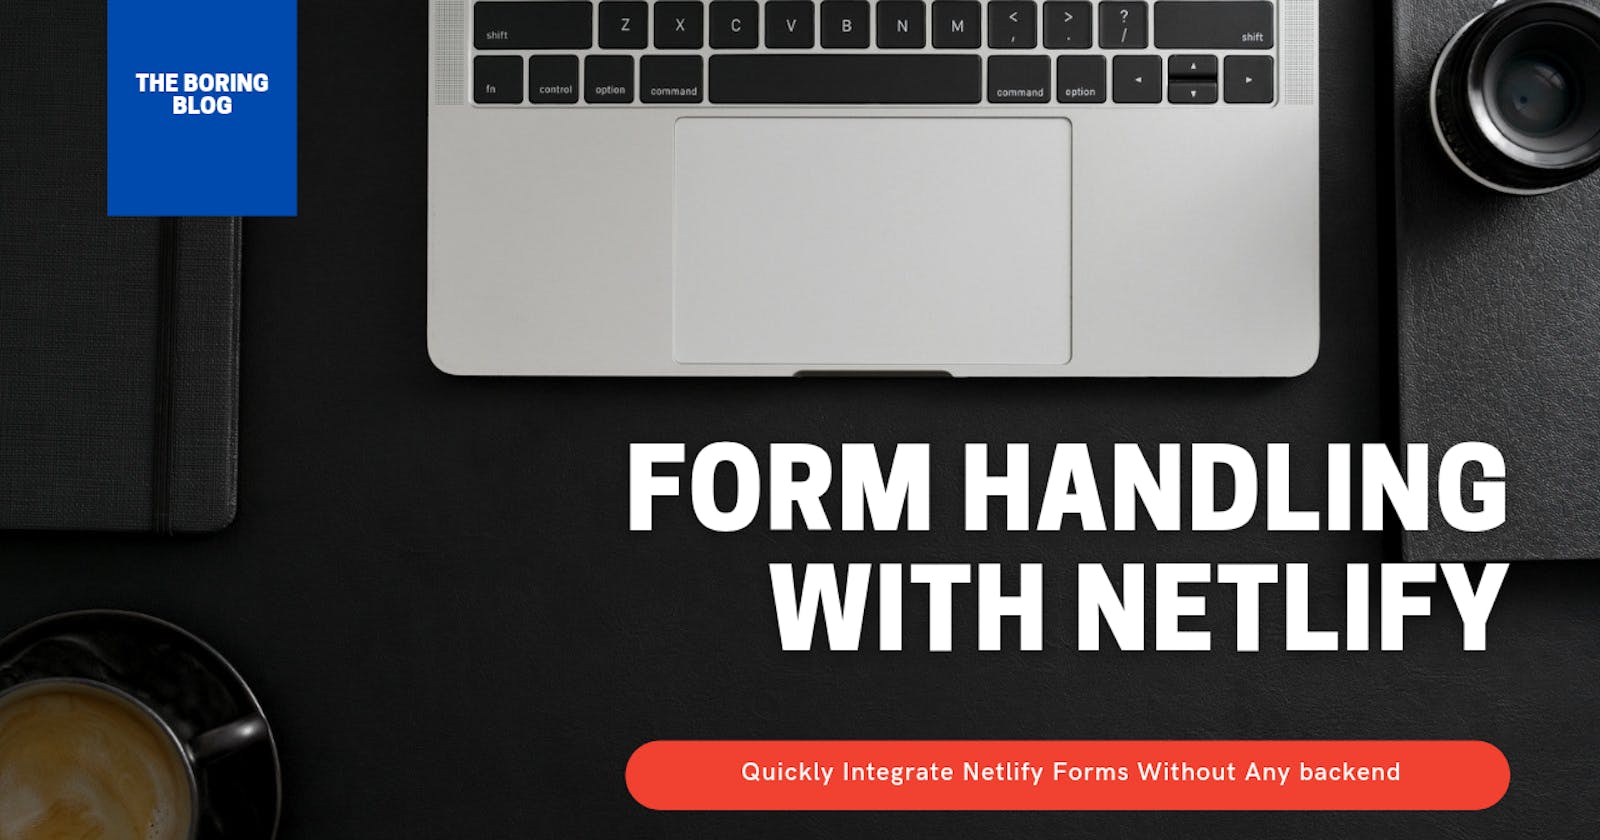 Using Netlify Forms